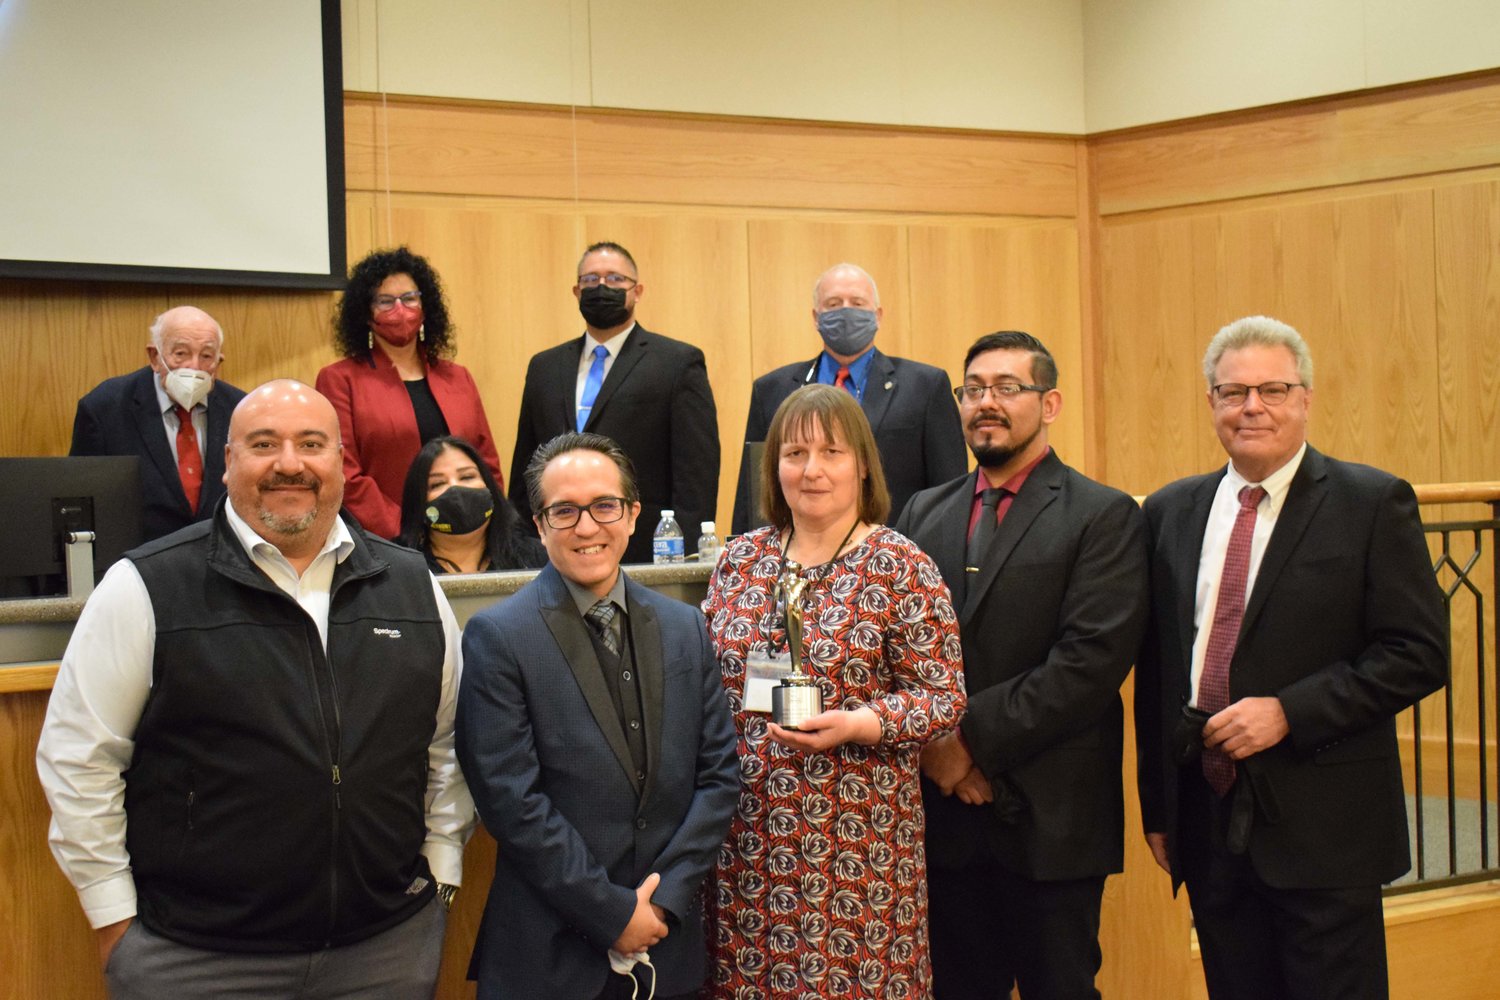 Receiving a 2021 Silver Telly Award for Doña Ana County, are, left to right, Al Marquez and Joel Marquez, both of Spectrum Reach; county Community and Constituent Services Manager Liz Reed; county Public Information Office Multi-Media Coordinator Joseph Vargas; and Spectrum Reach local Sales Manager Ray May. Behind the dais are, Doña Ana County Commissioners, standing, left to right, Lynn Ellins, Susie Chaparro, Manuel Sanchez and Shannon Reynolds; and, seated, Diana Murillo-Trujillo